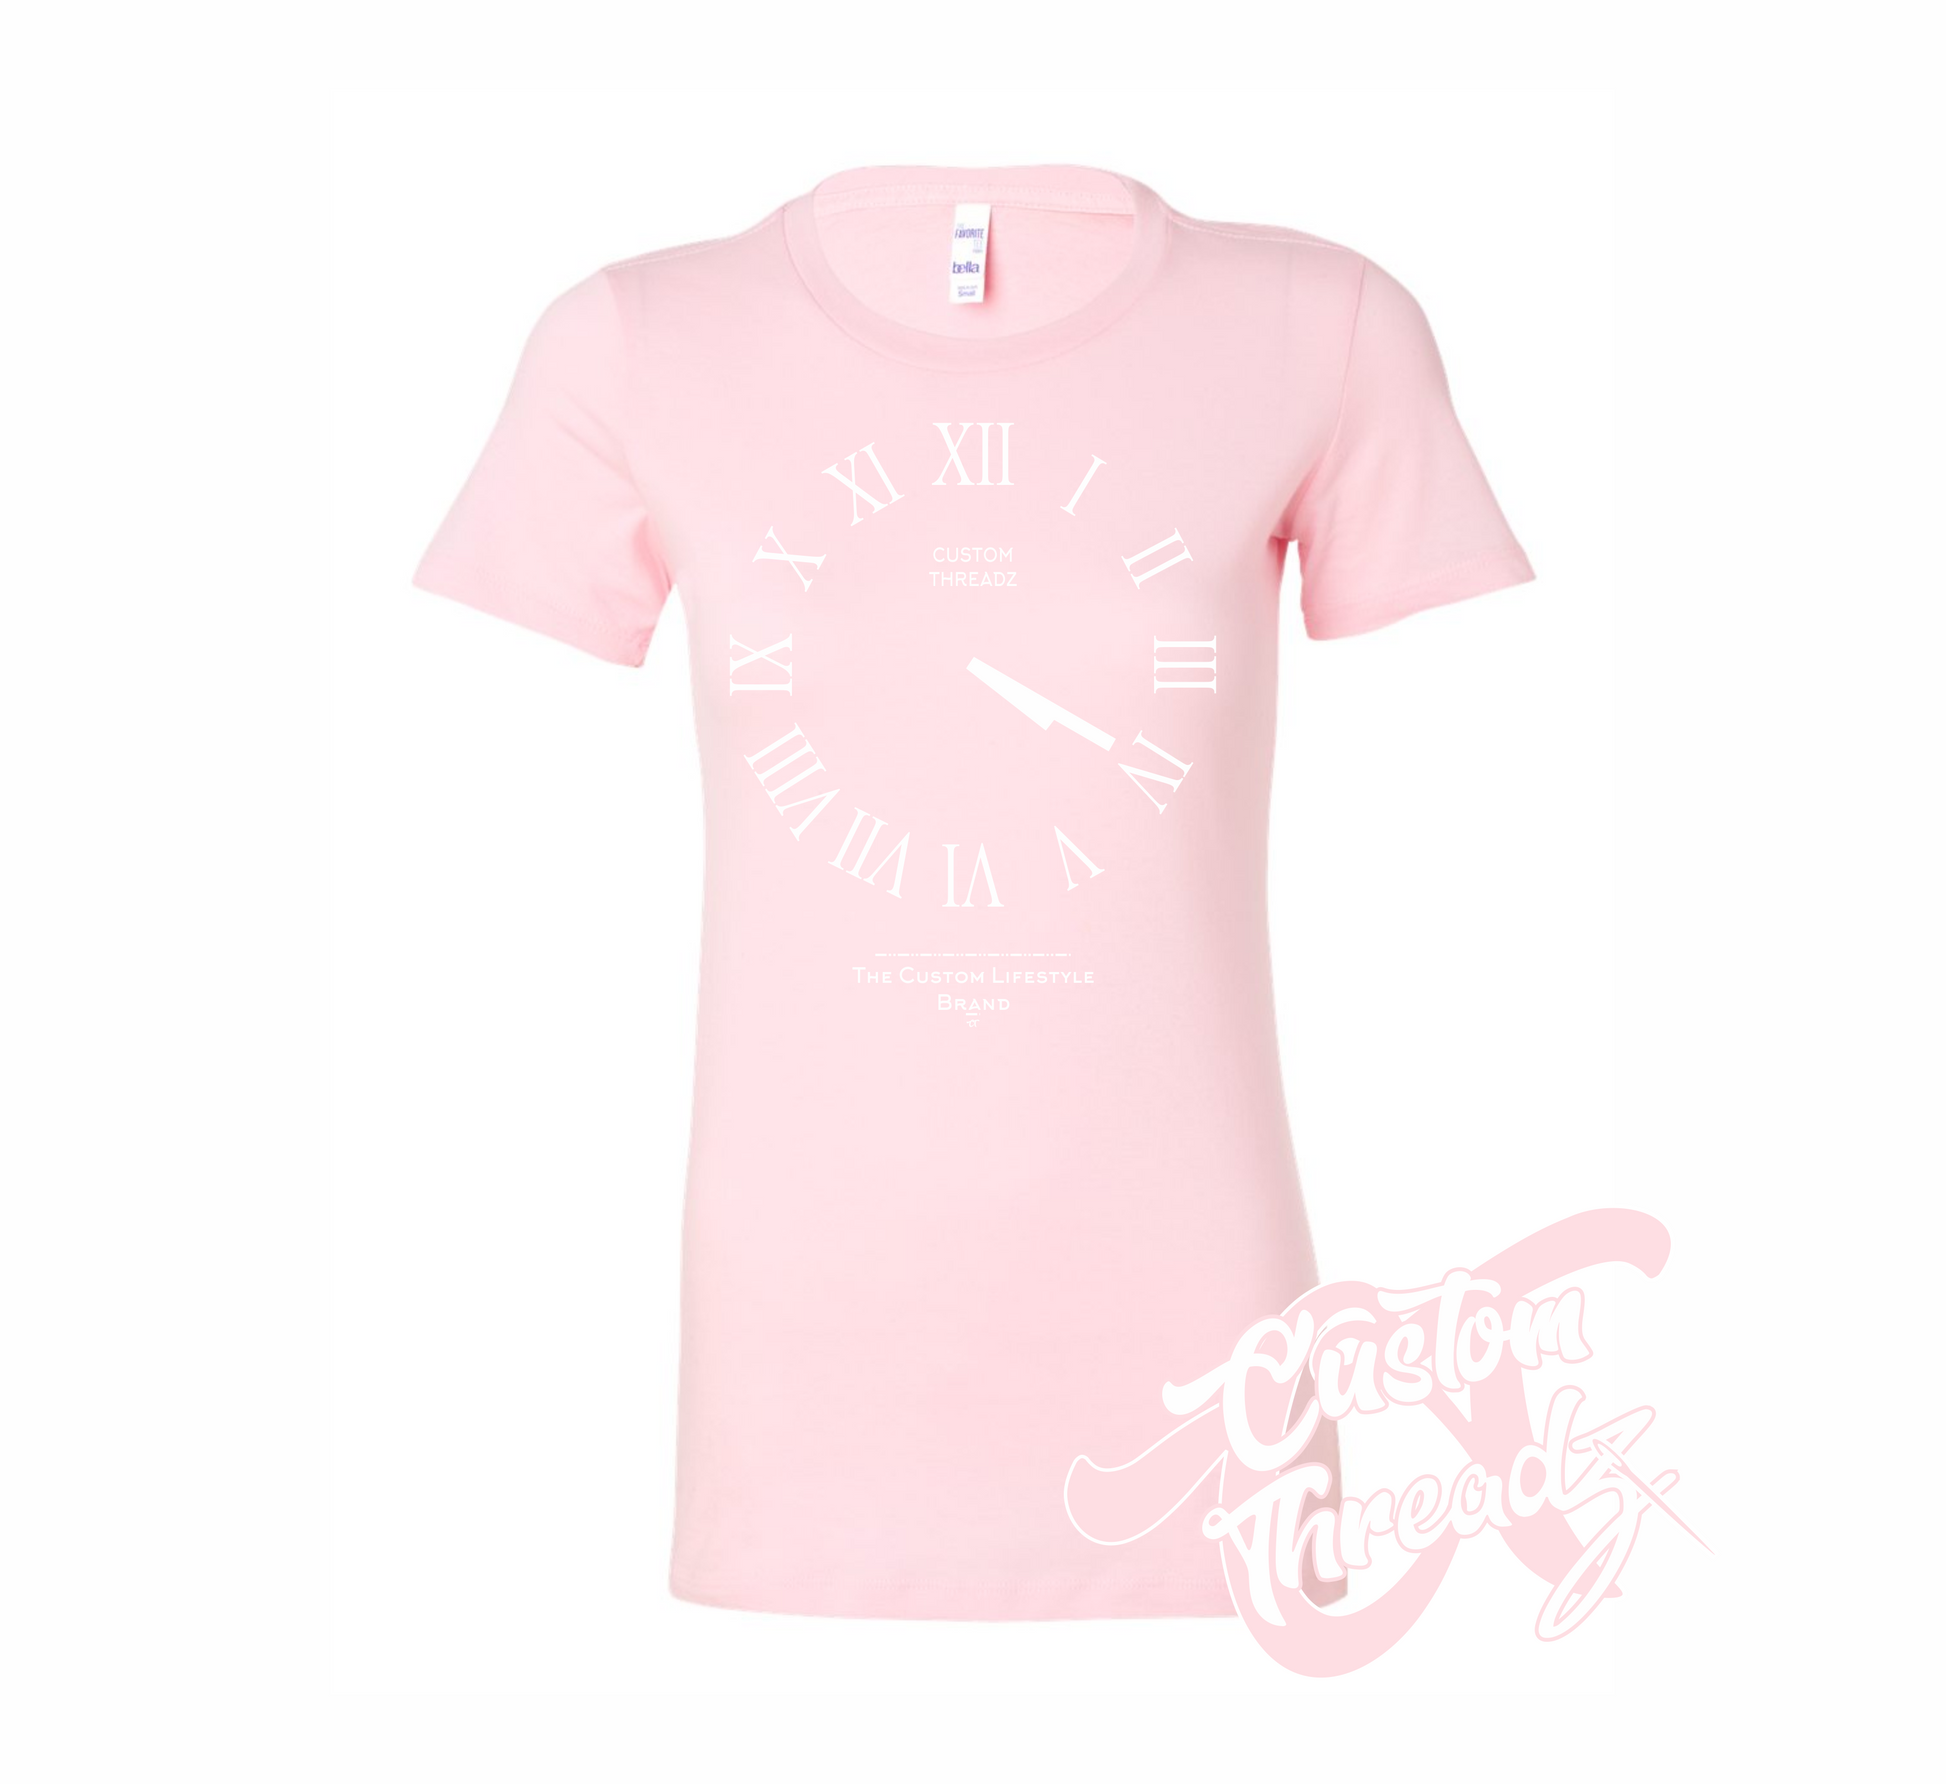 pink womens tee with roman analog clock set to 4 20 DTG printed design